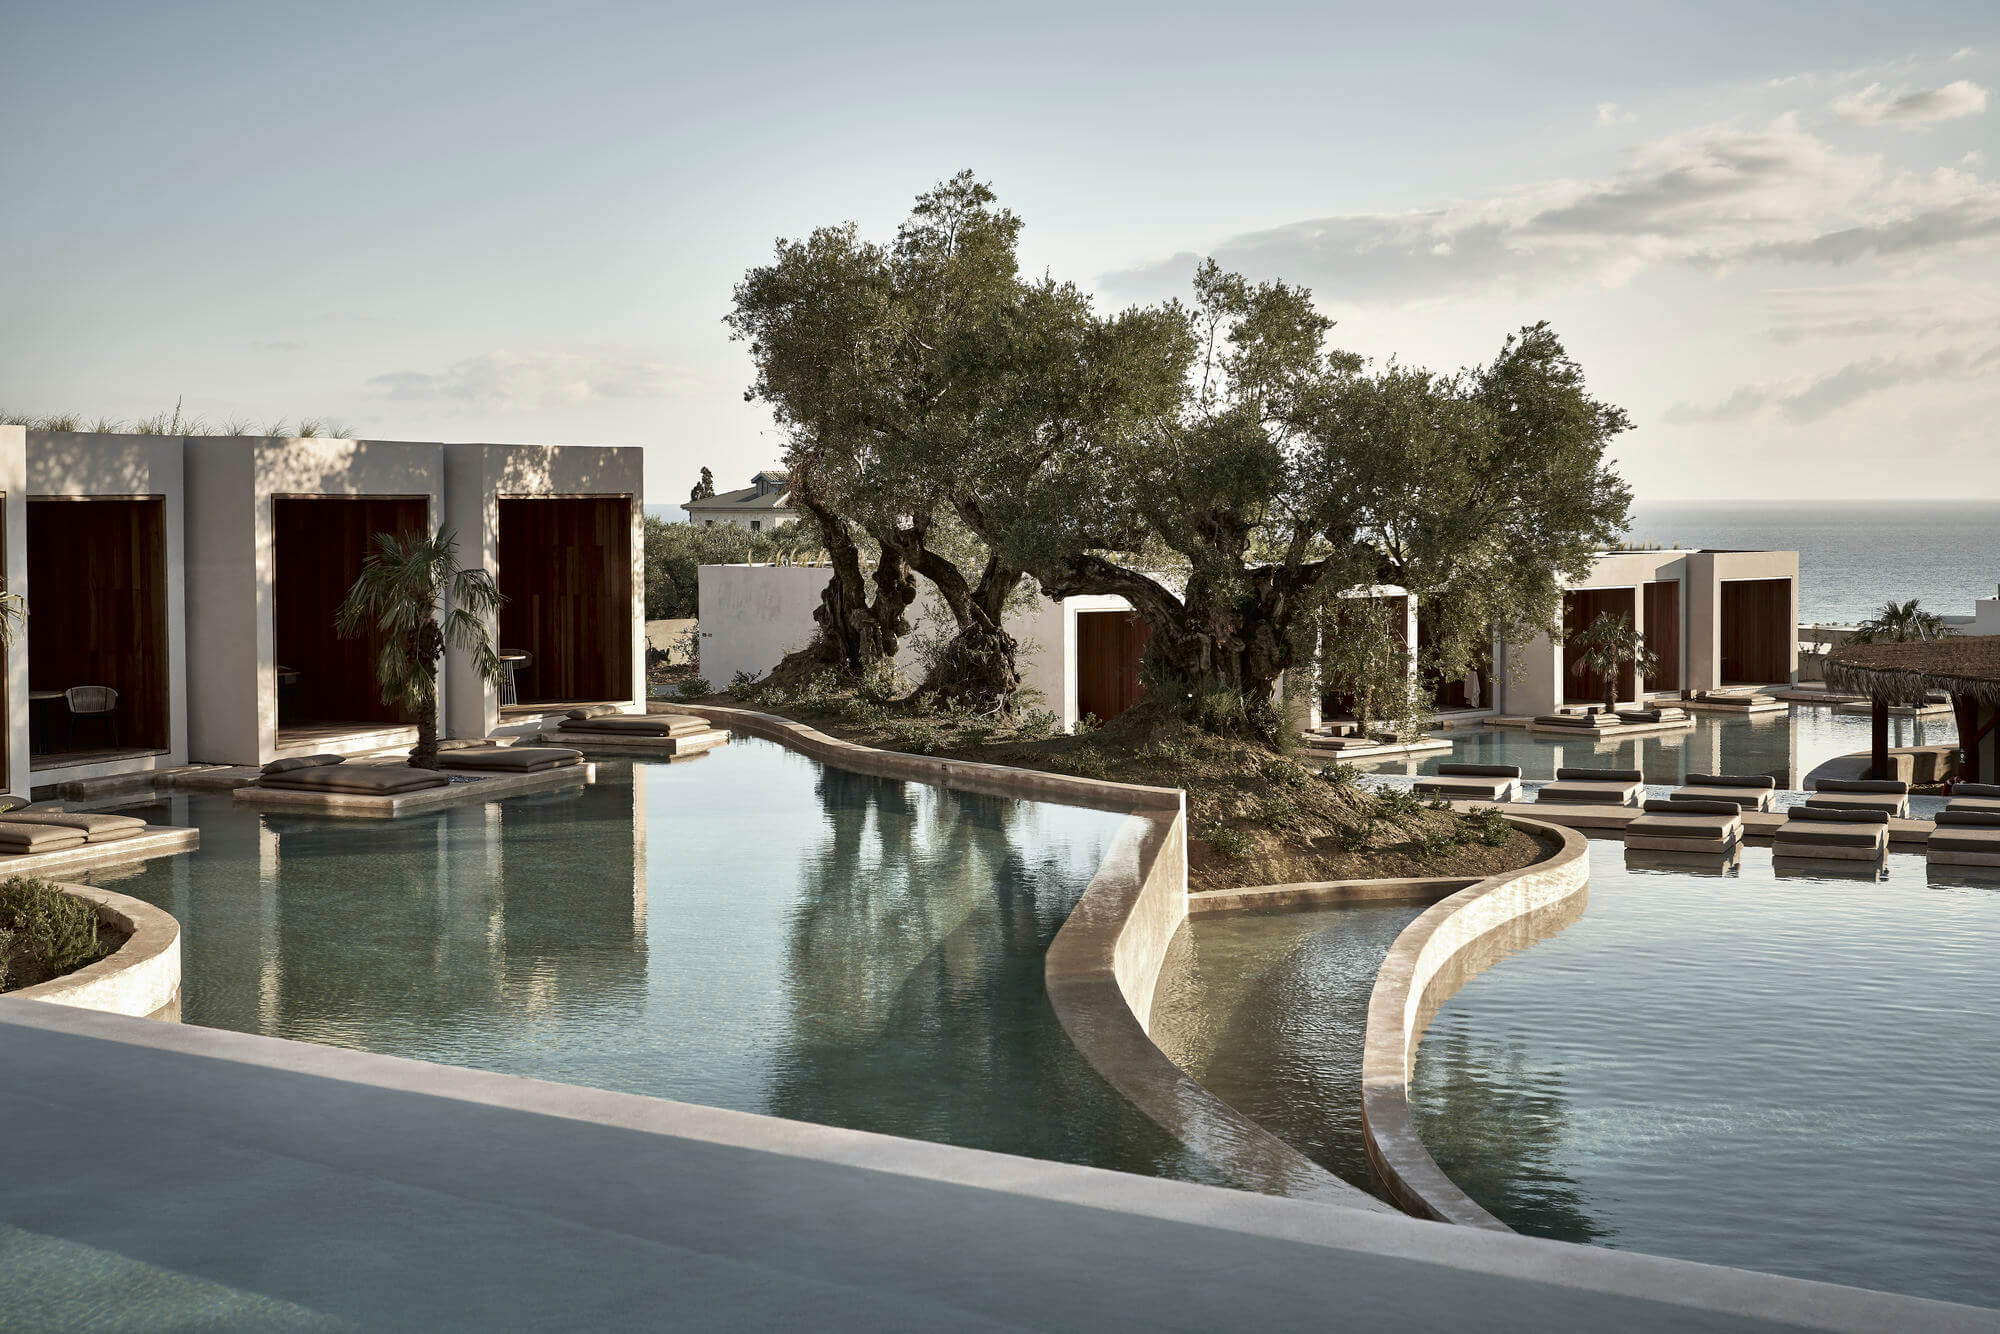 The Olea Suites Hotel, A Contemporary & Peaceful Relaxing Place